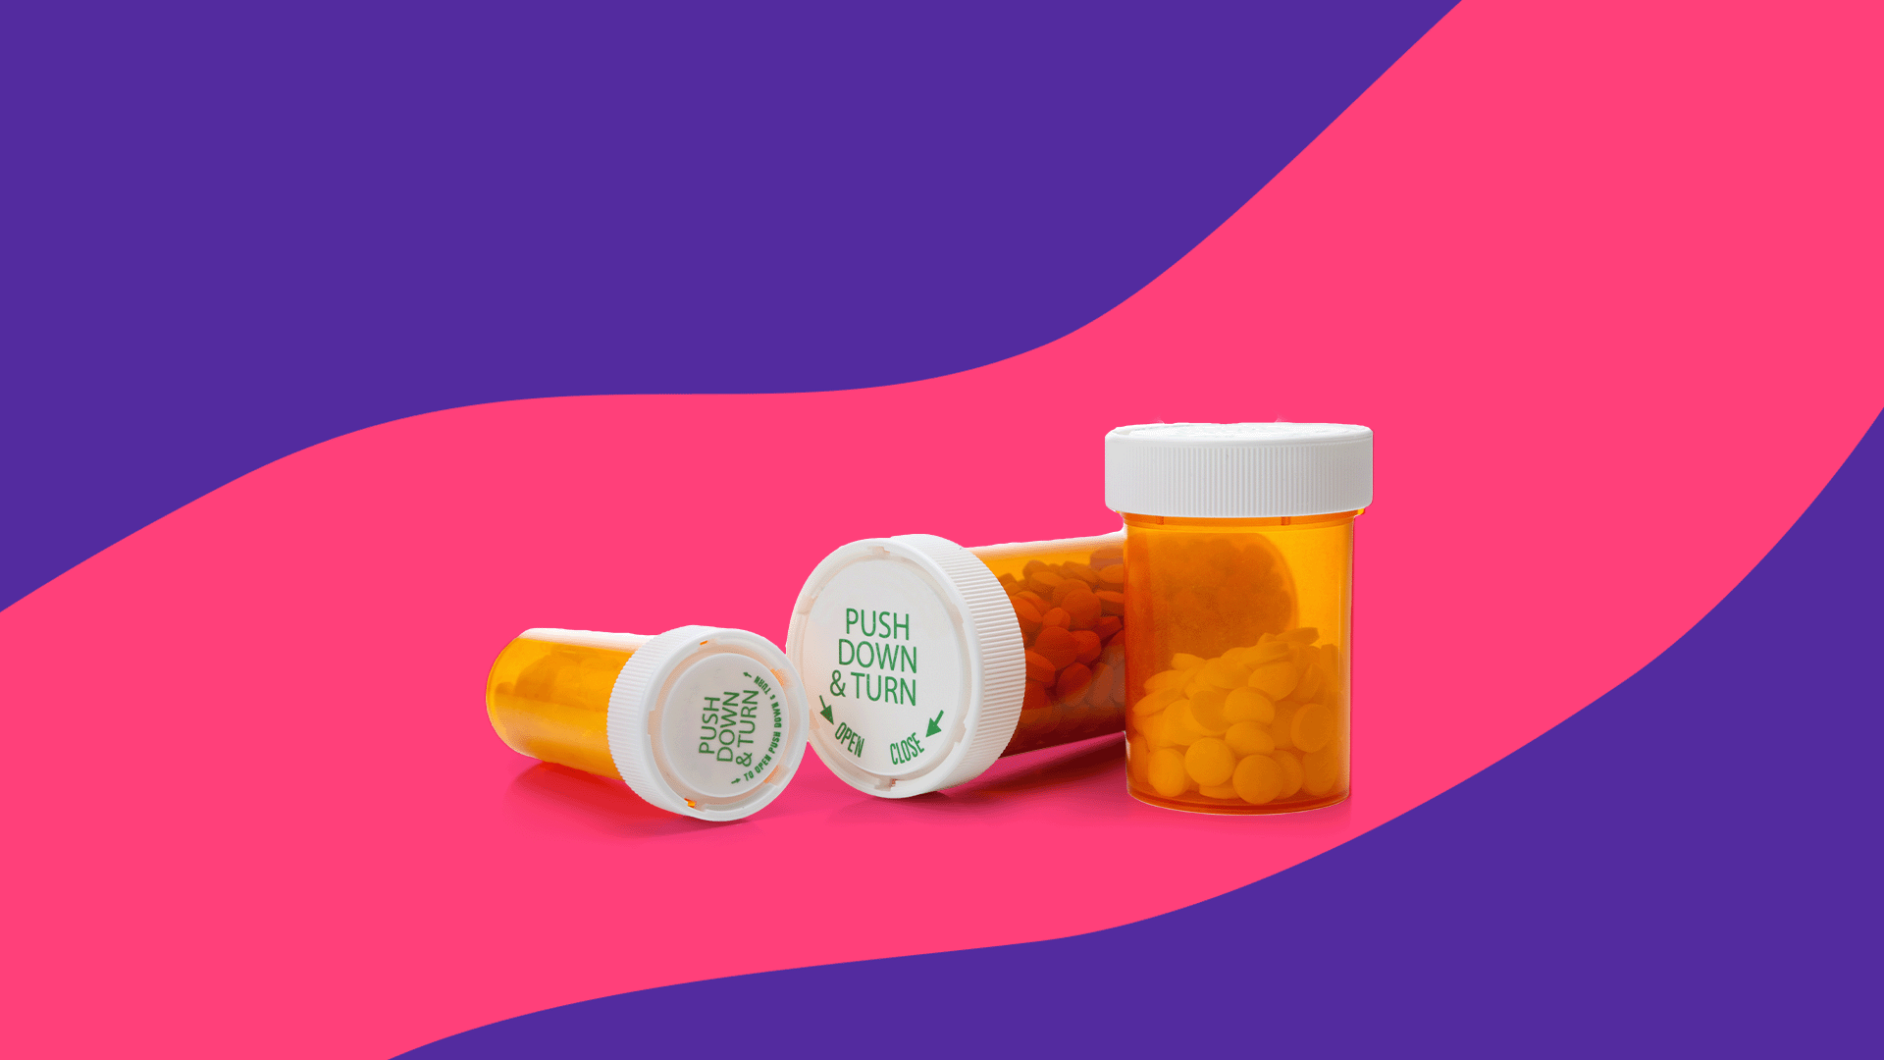 Rx pill bottles: How much is Janumet without insurance?